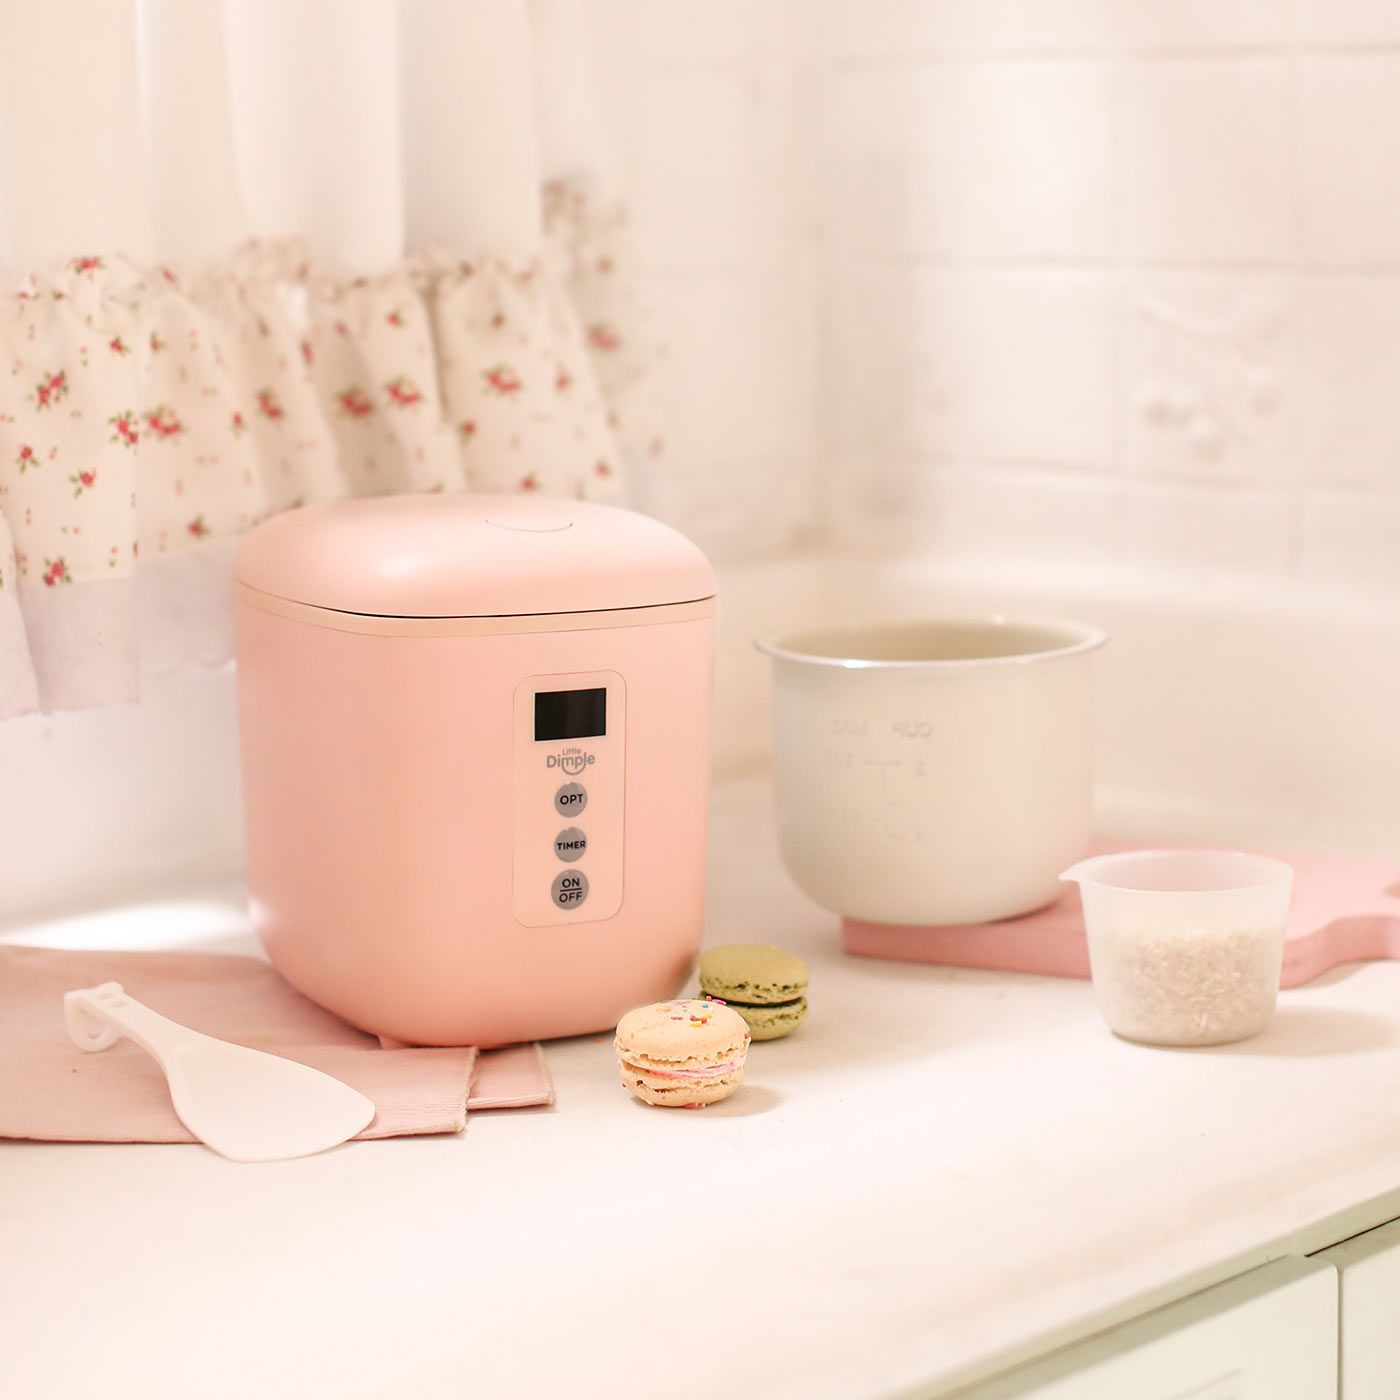 Little Dimple Mini Rice Cooker Pink - 2